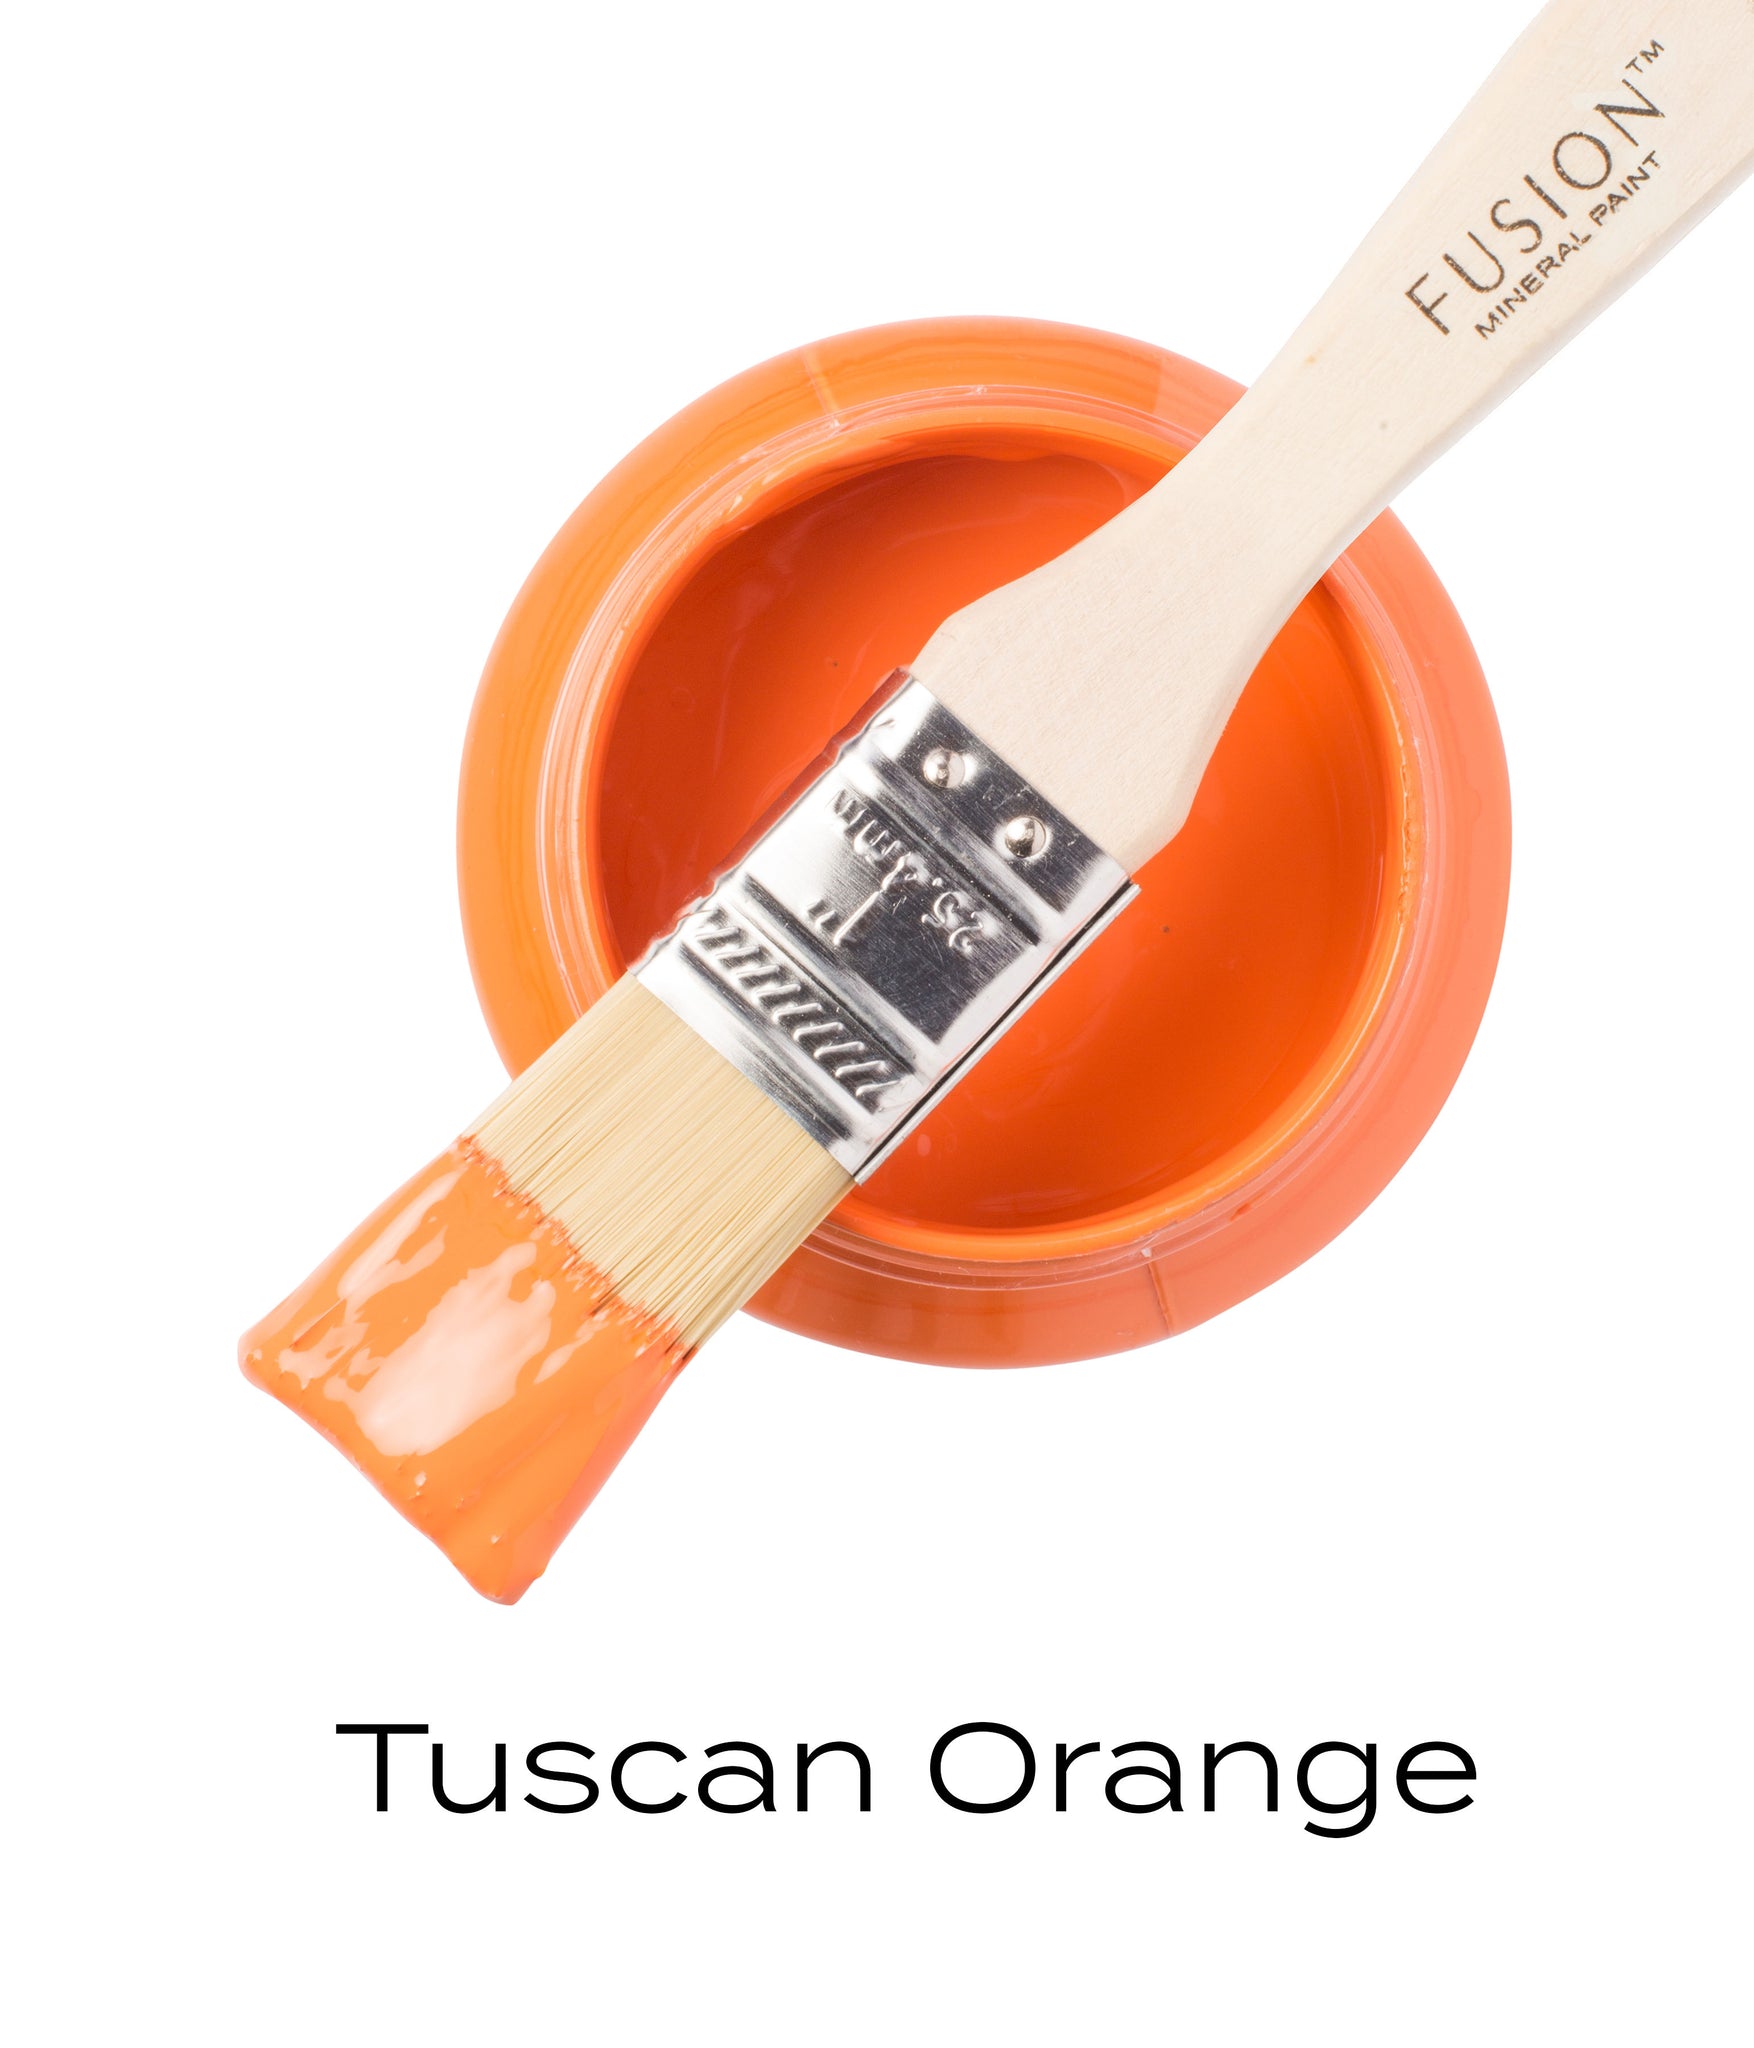 Nyhed! Fusion mineral paint - Tuscan orange